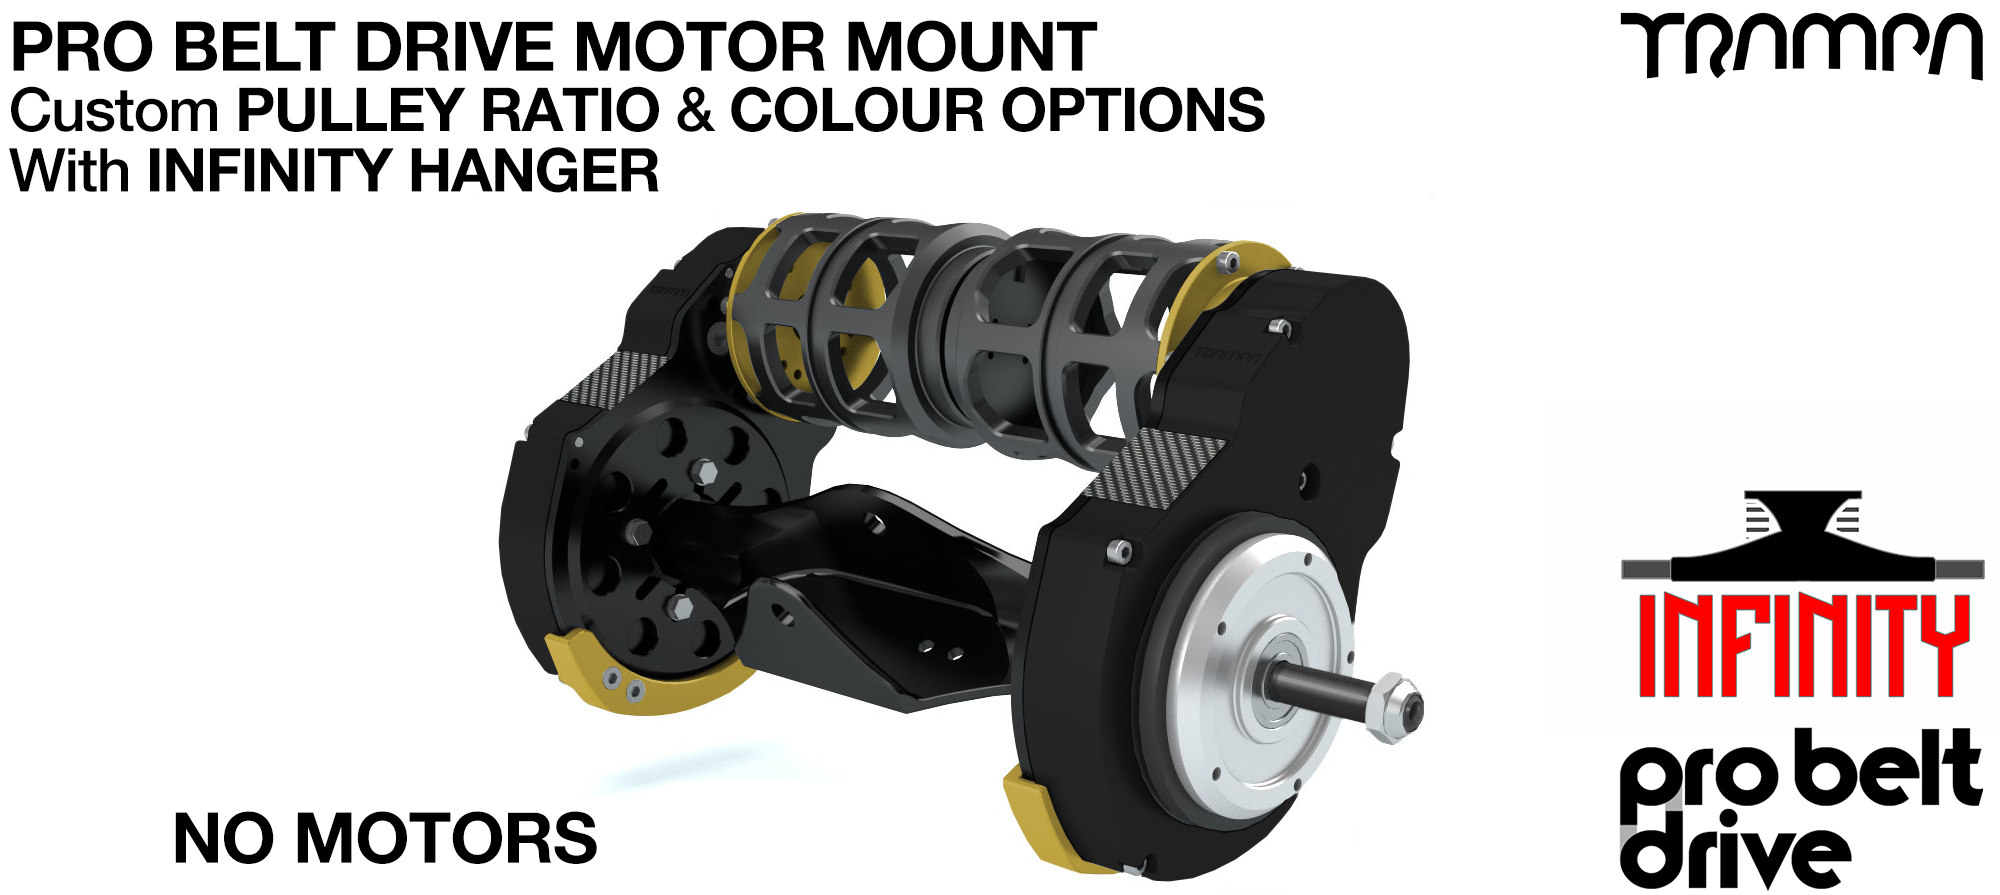 16mm PRO BELT DRIVE Motor Mounts with PULLEYS & FILTERS mounted on a CNC Hanger - NO Motors 